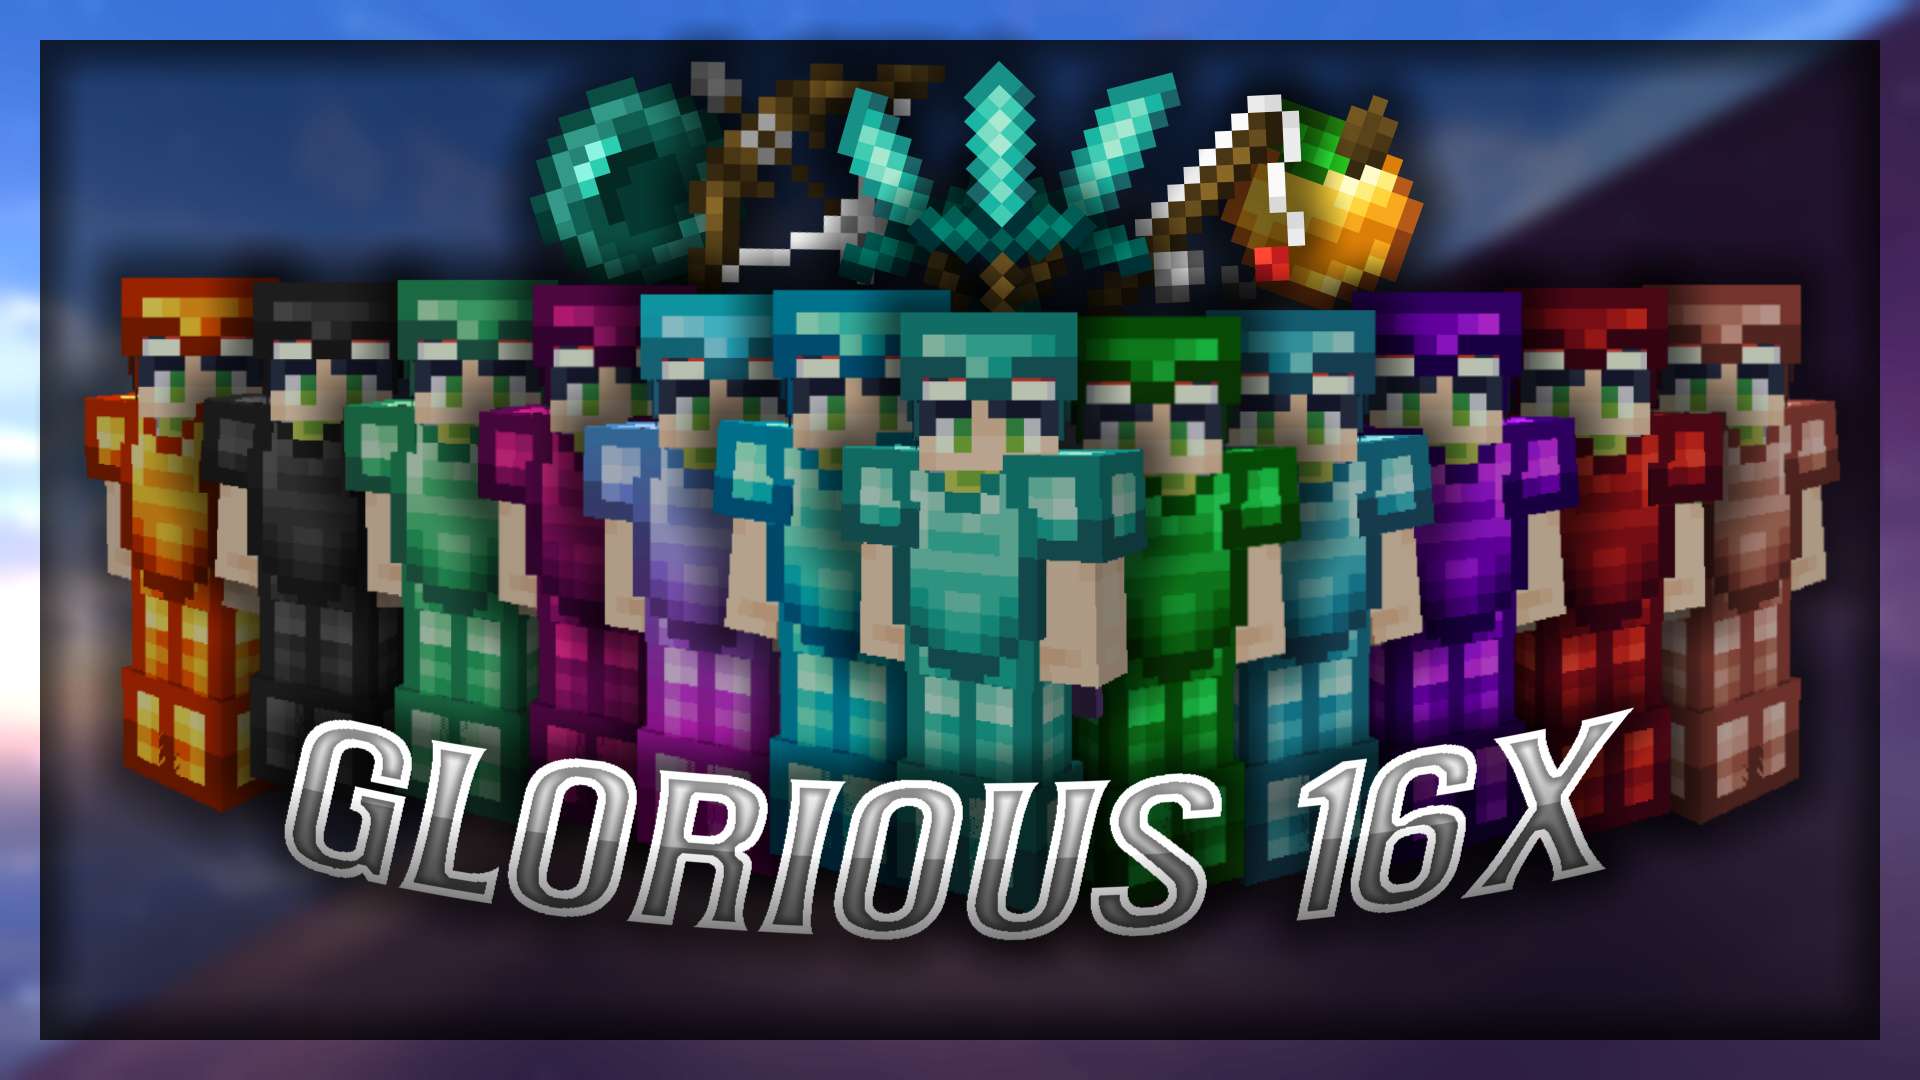 (open zip with WinRAR) Glorious - Ice 16 by Mek on PvPRP